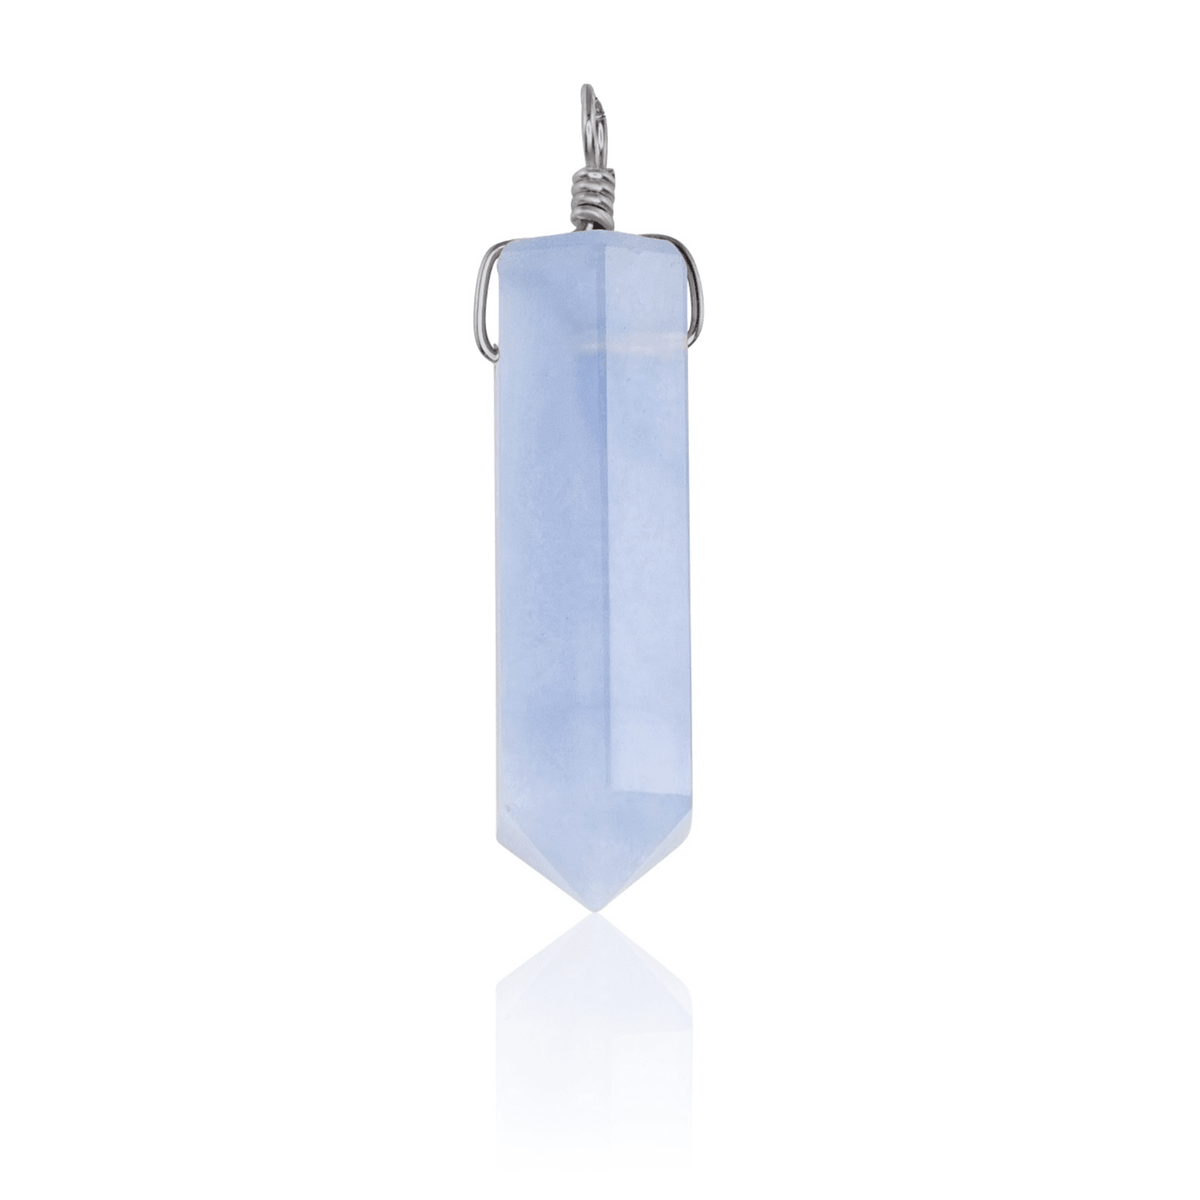 Large Blue Lace Agate Crystal Tower Point Generator Pendant - Large Blue Lace Agate Crystal Tower Point Generator Pendant - Stainless Steel - Luna Tide Handmade Crystal Jewellery